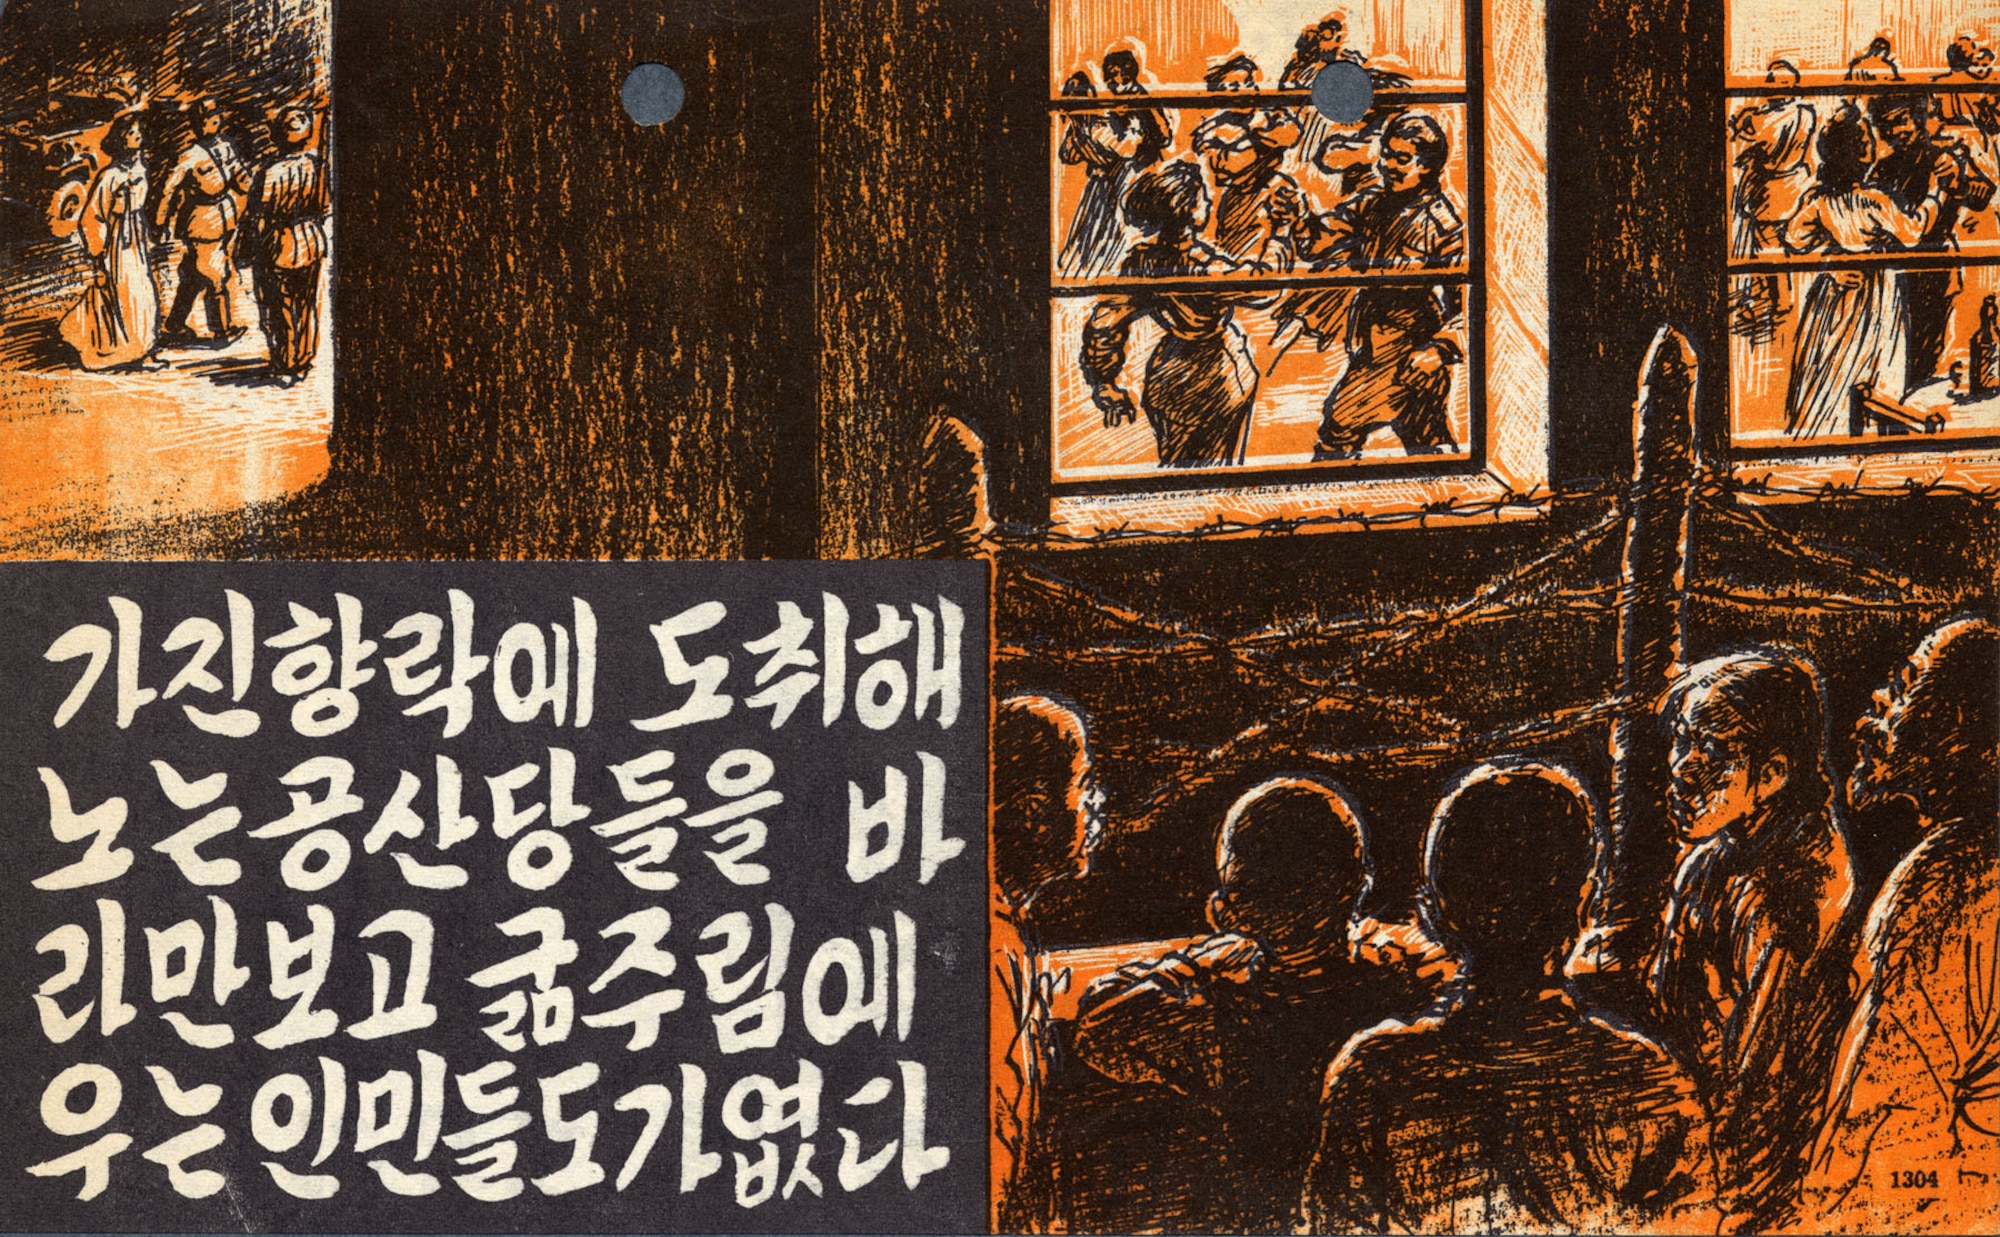 Written in Korean, this leaflet contrasted communist leaders’ luxury with the poverty of the average North Korean citizen. The front (shown here) shows poor Koreans watching an extravagant party from outside a guarded building. The back shows a poorly-clothed and starving mother and child compared to the well-fed leader of North Korea, Kim Il Sung. (U.S. Air Force photo)